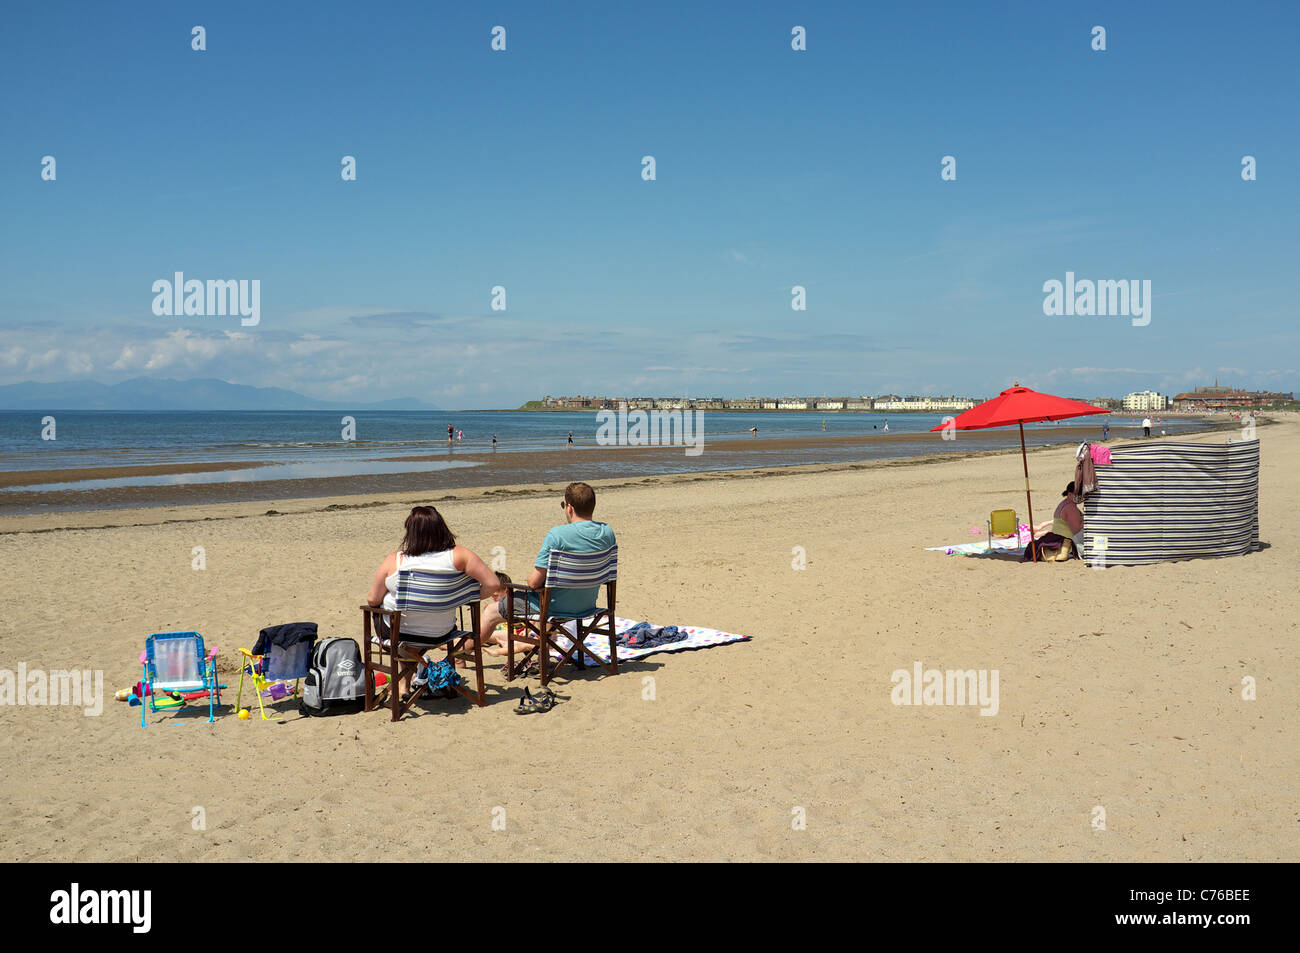 Families on the beach at Troon, Ayrshire, Scotland, UK, Great Britain Stock Photo